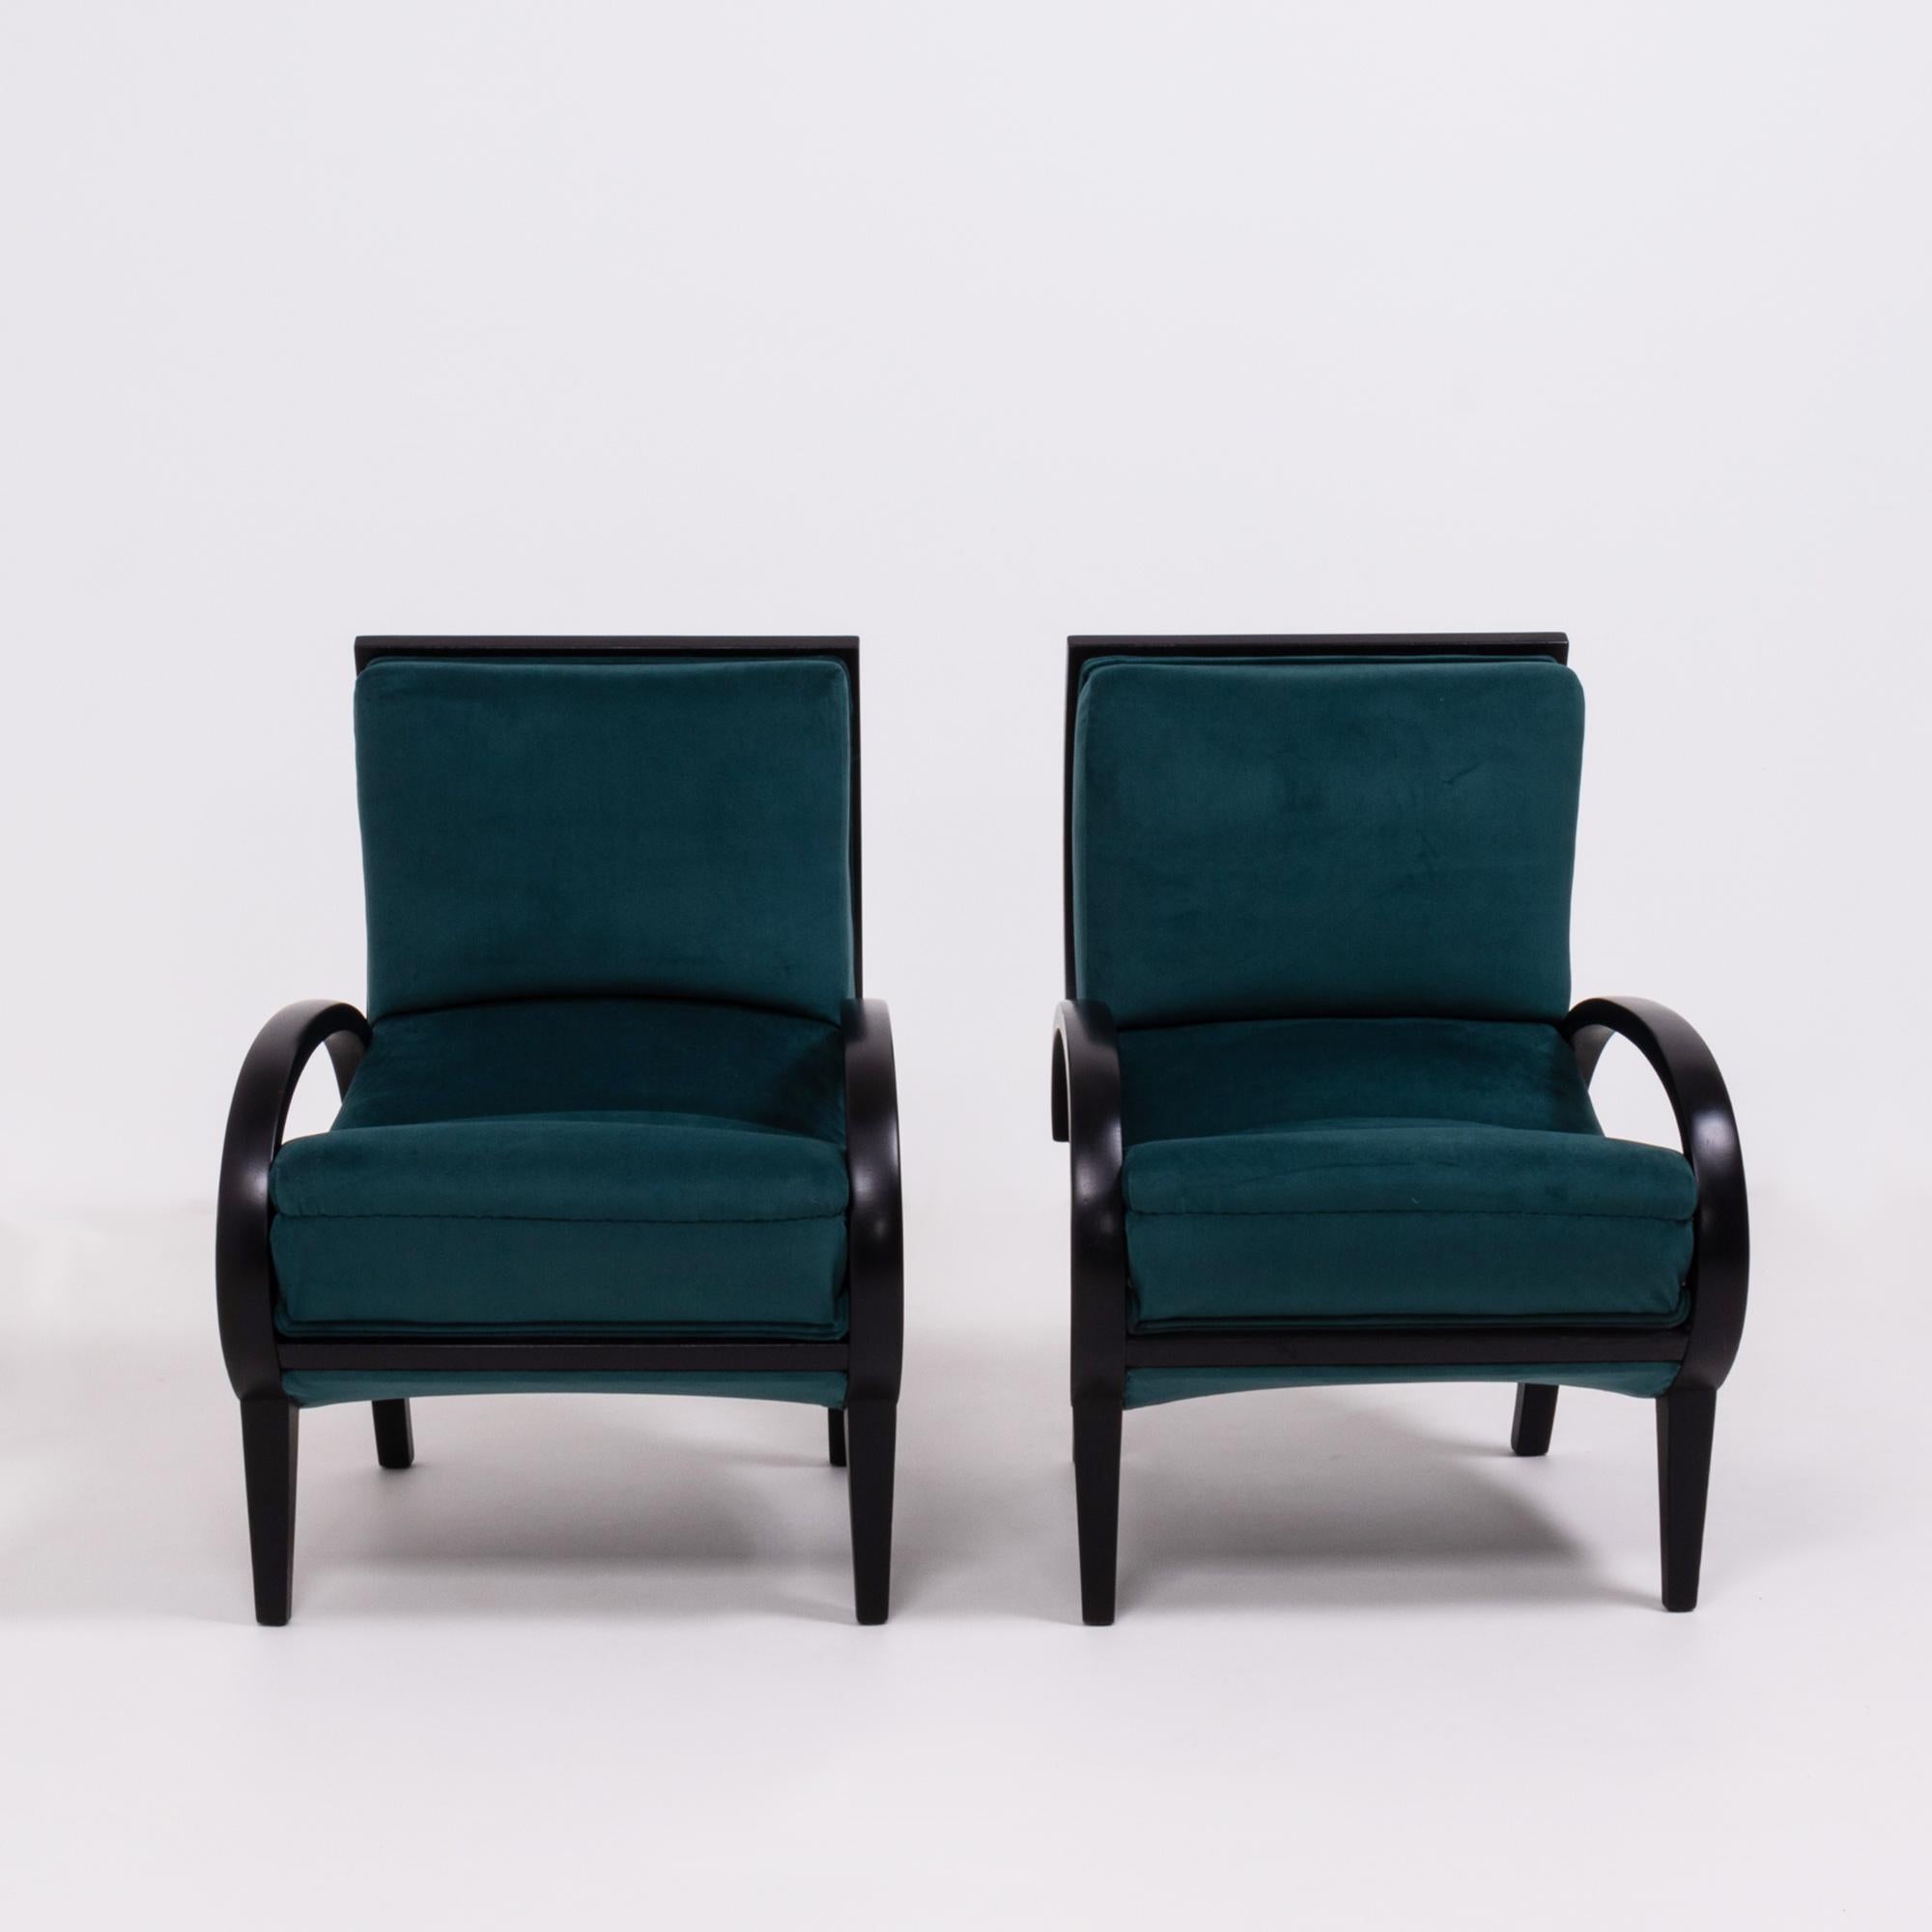 Early 20th Century 1920s Art Deco Teal Velvet Bentwood Armchairs, Set of 2